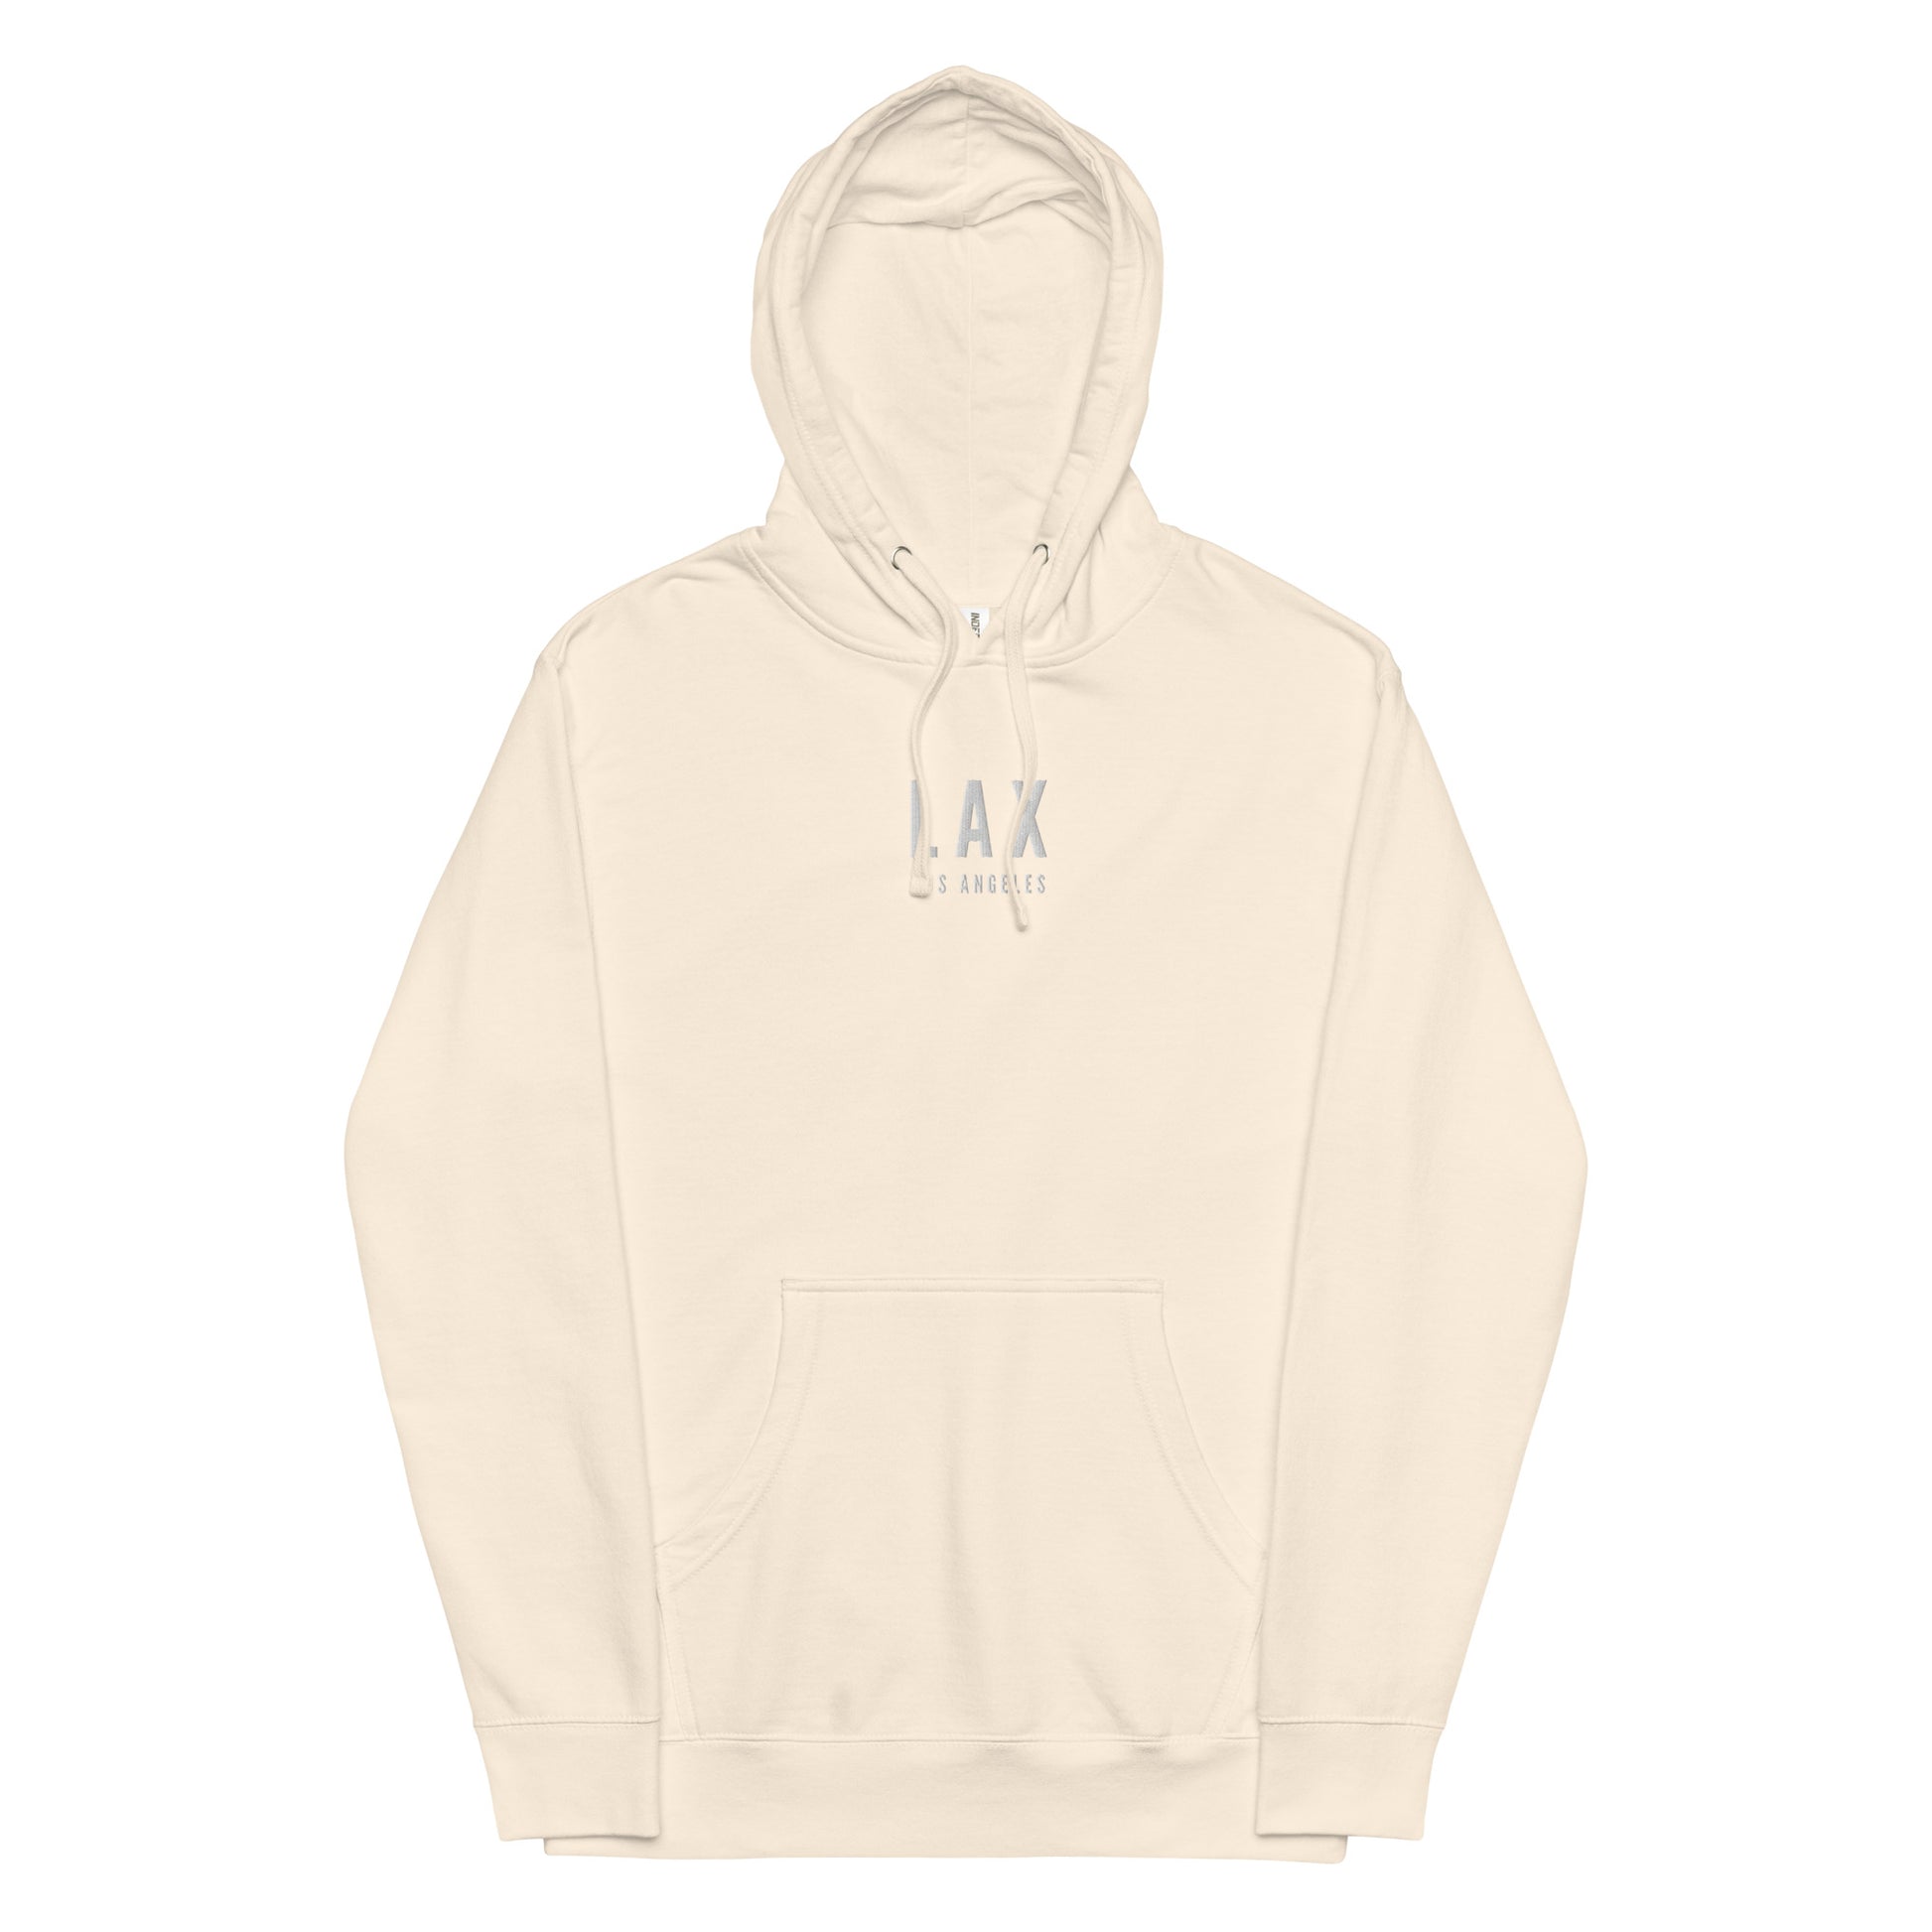 City Midweight Hoodie - White • LAX Los Angeles • YHM Designs - Image 17